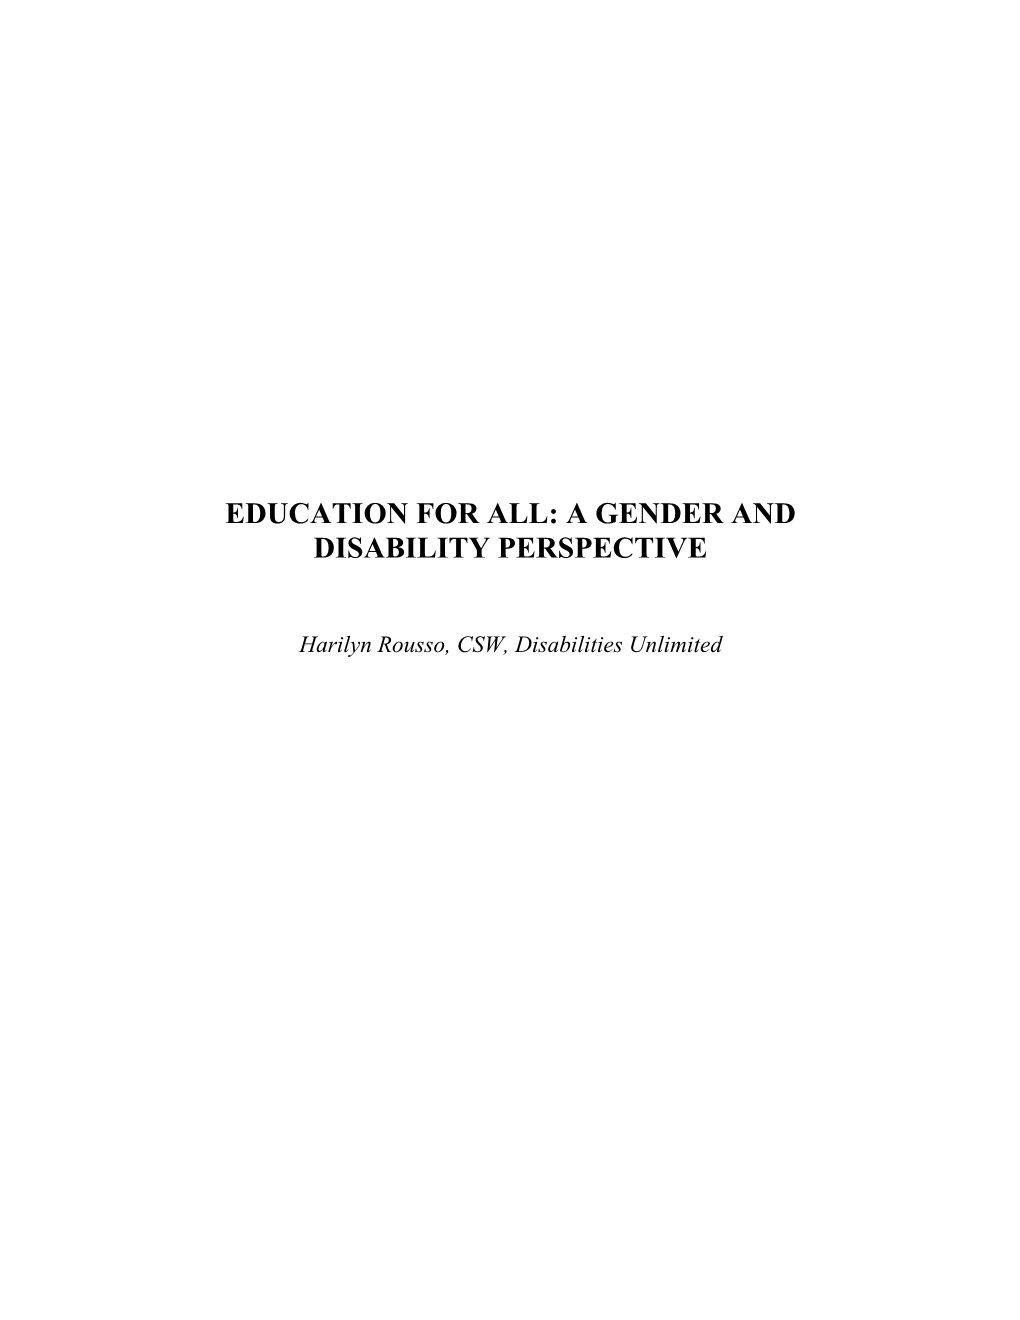 Education for All: a Gender and Disability Perspective